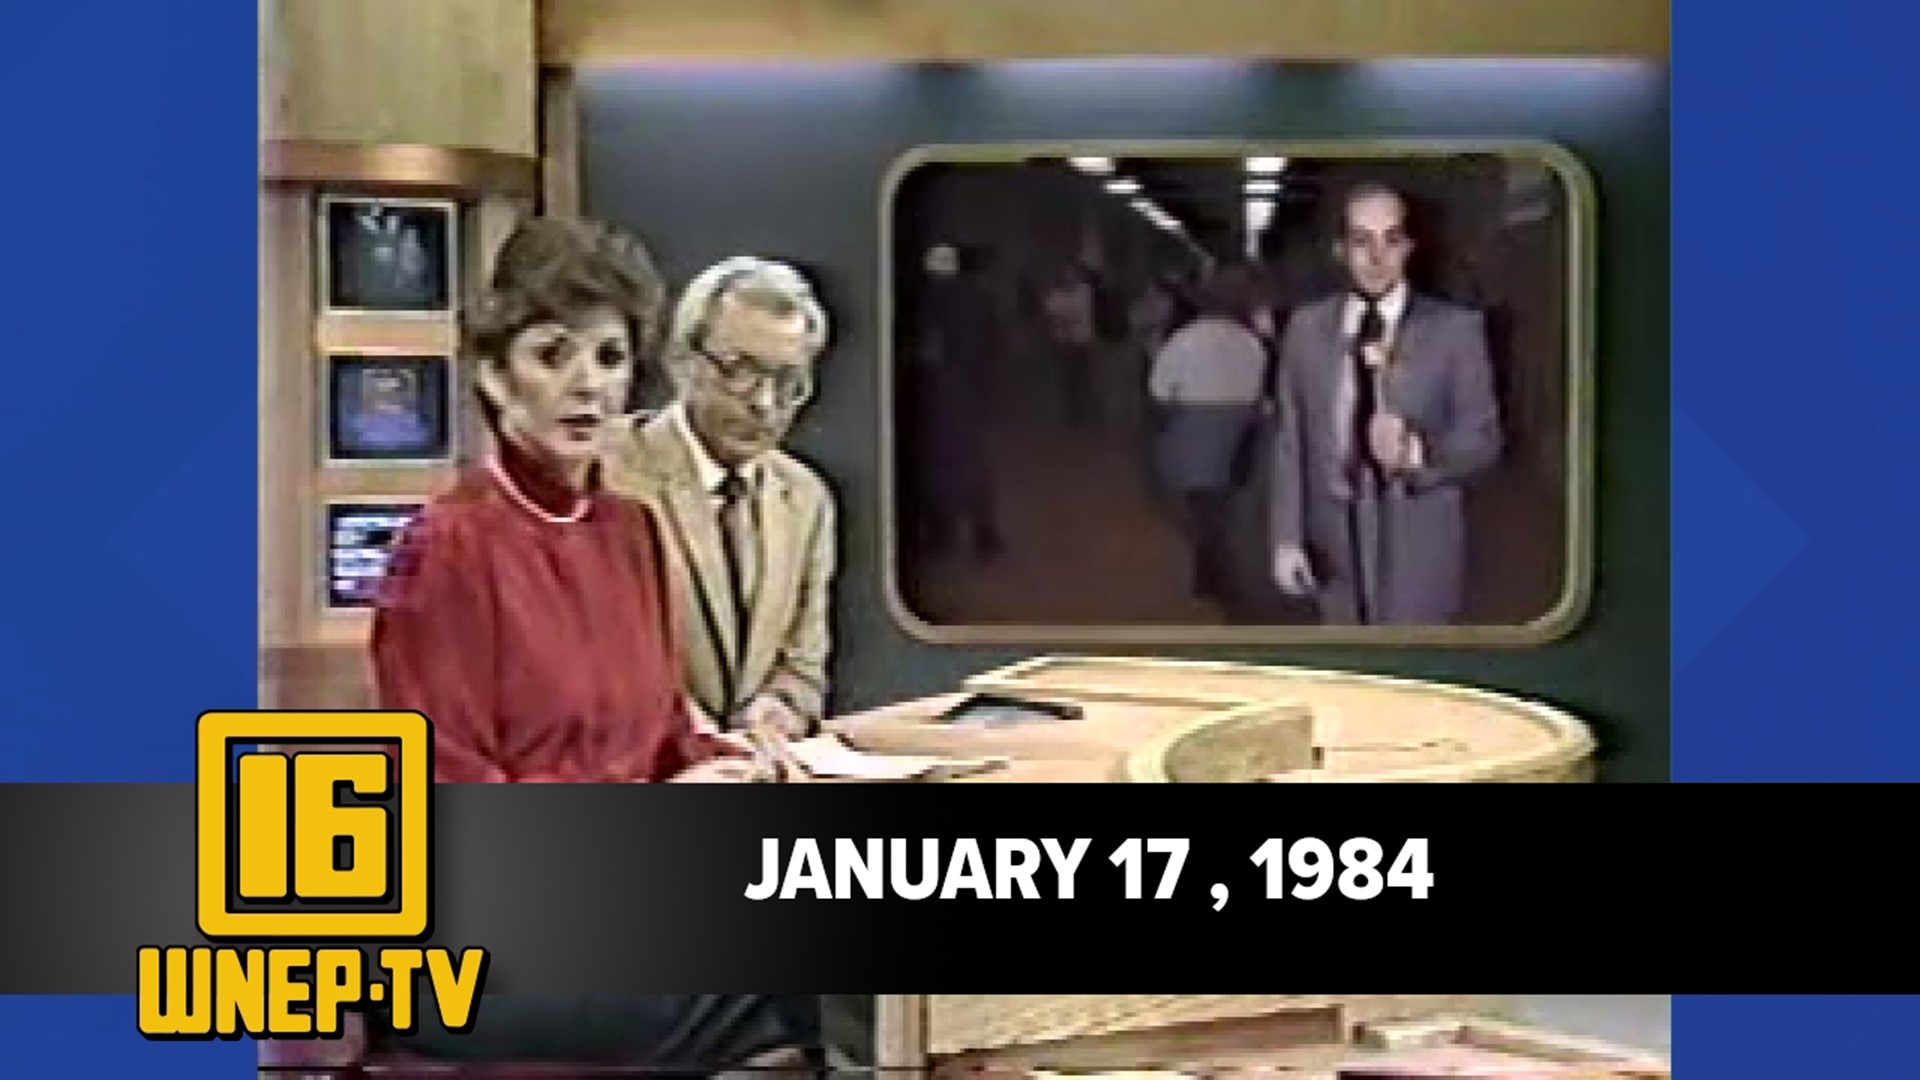 Join Karen Harch and Nolan Johannes with curated stories from January 17, 1984.